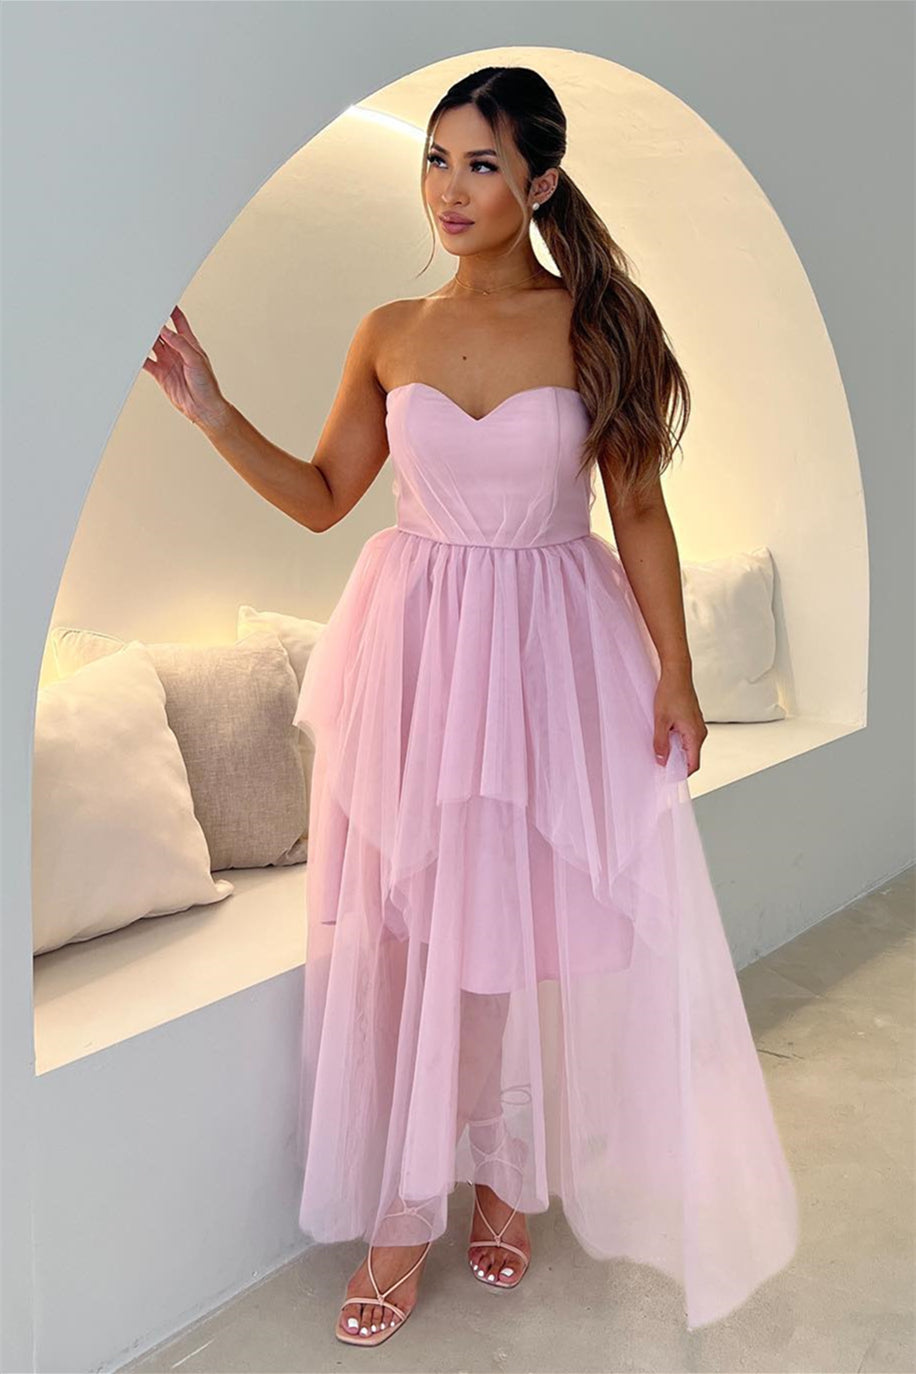 Floral Lace Strapless Baby Pink Tulle Prom Dress - Xdressy